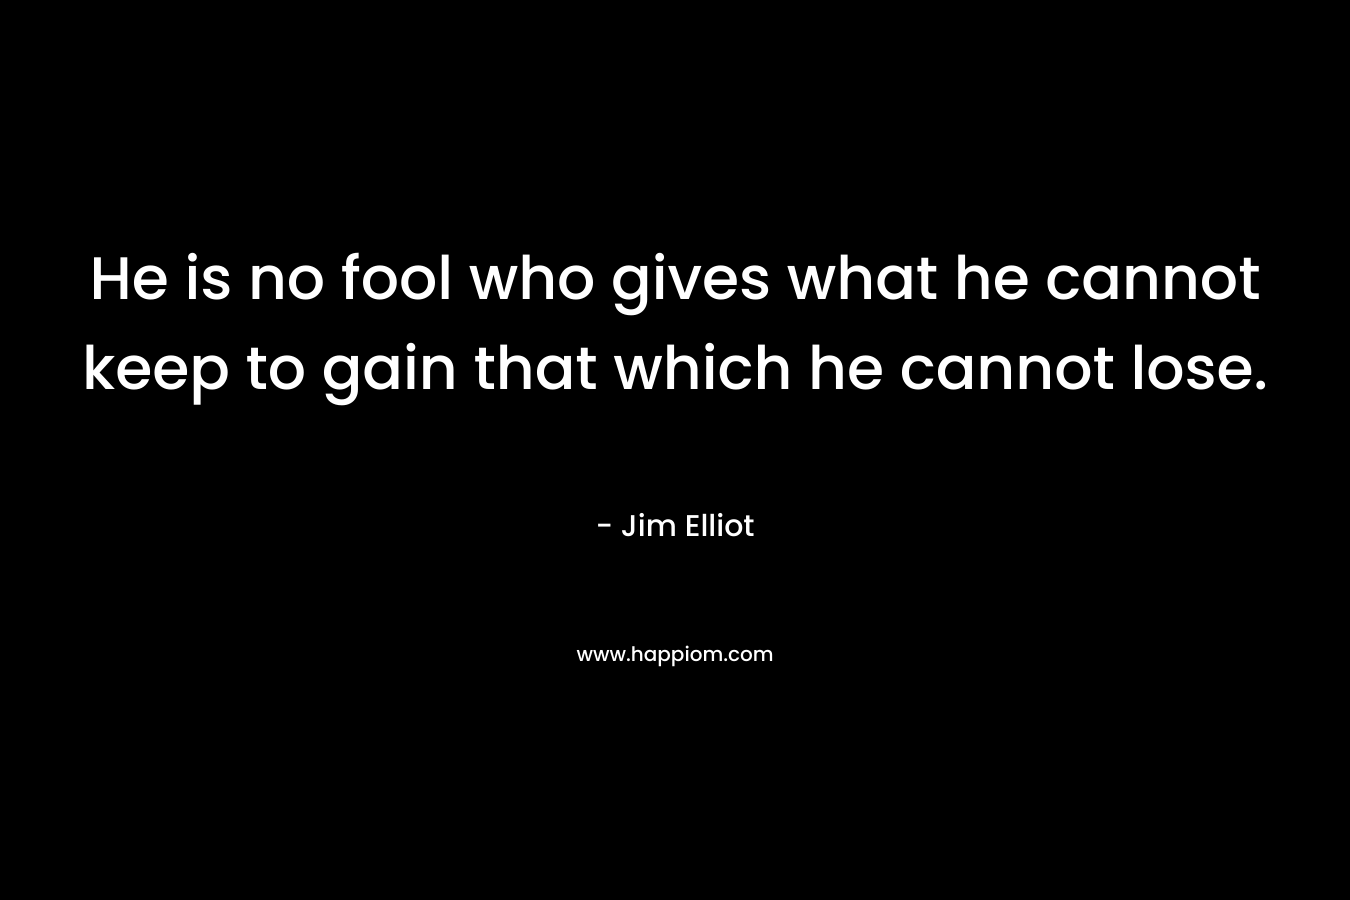 He is no fool who gives what he cannot keep to gain that which he cannot lose.